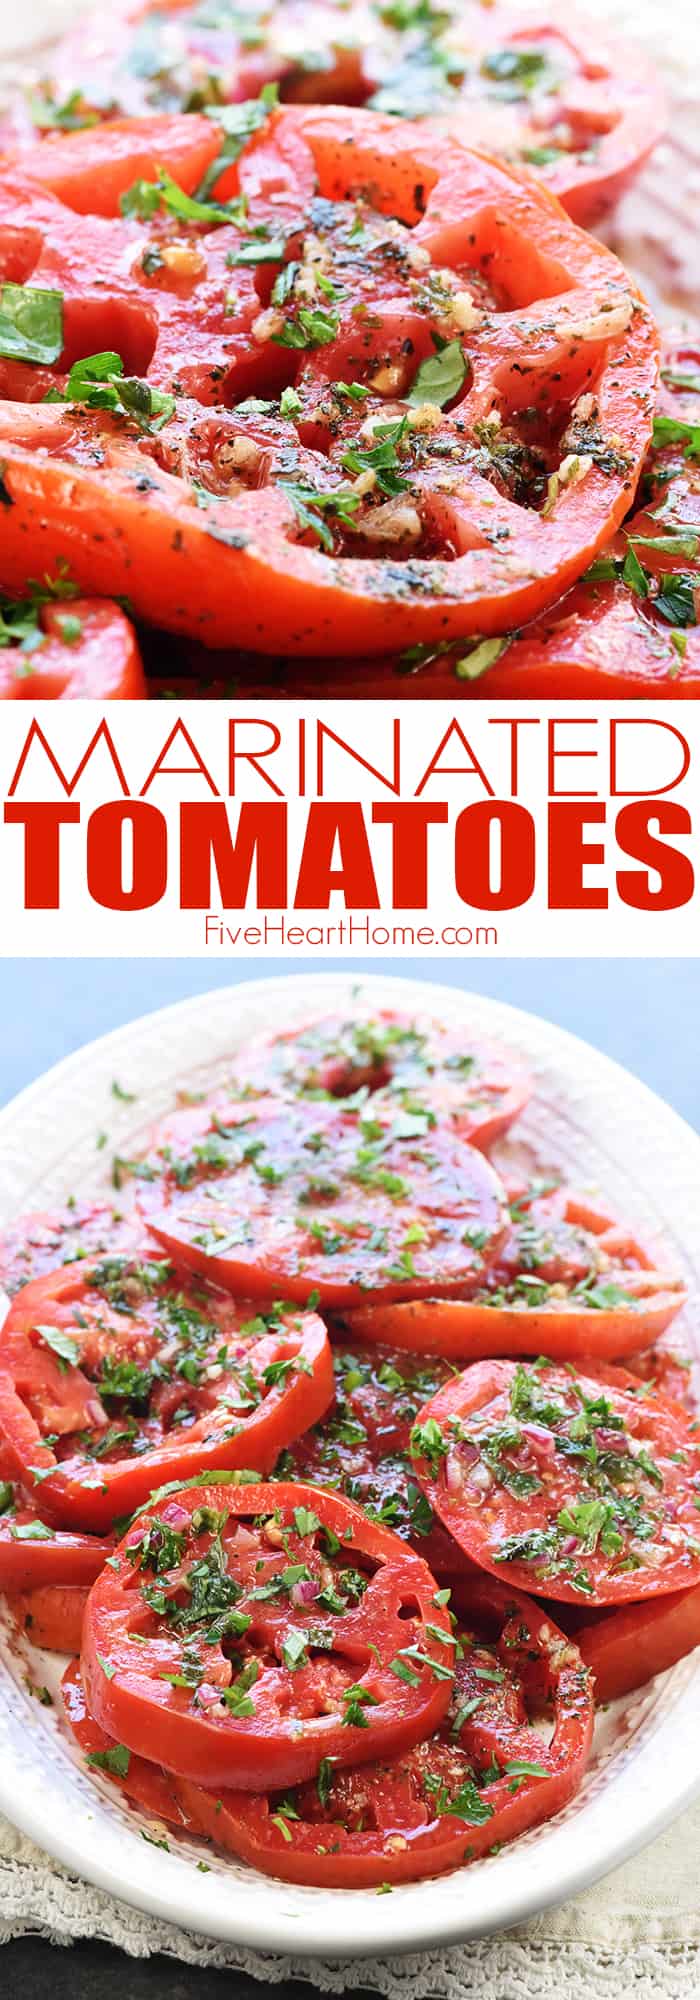 AMAZING Marinated Tomatoes {Simple + DELICIOUS!} • FIVEheartHOME